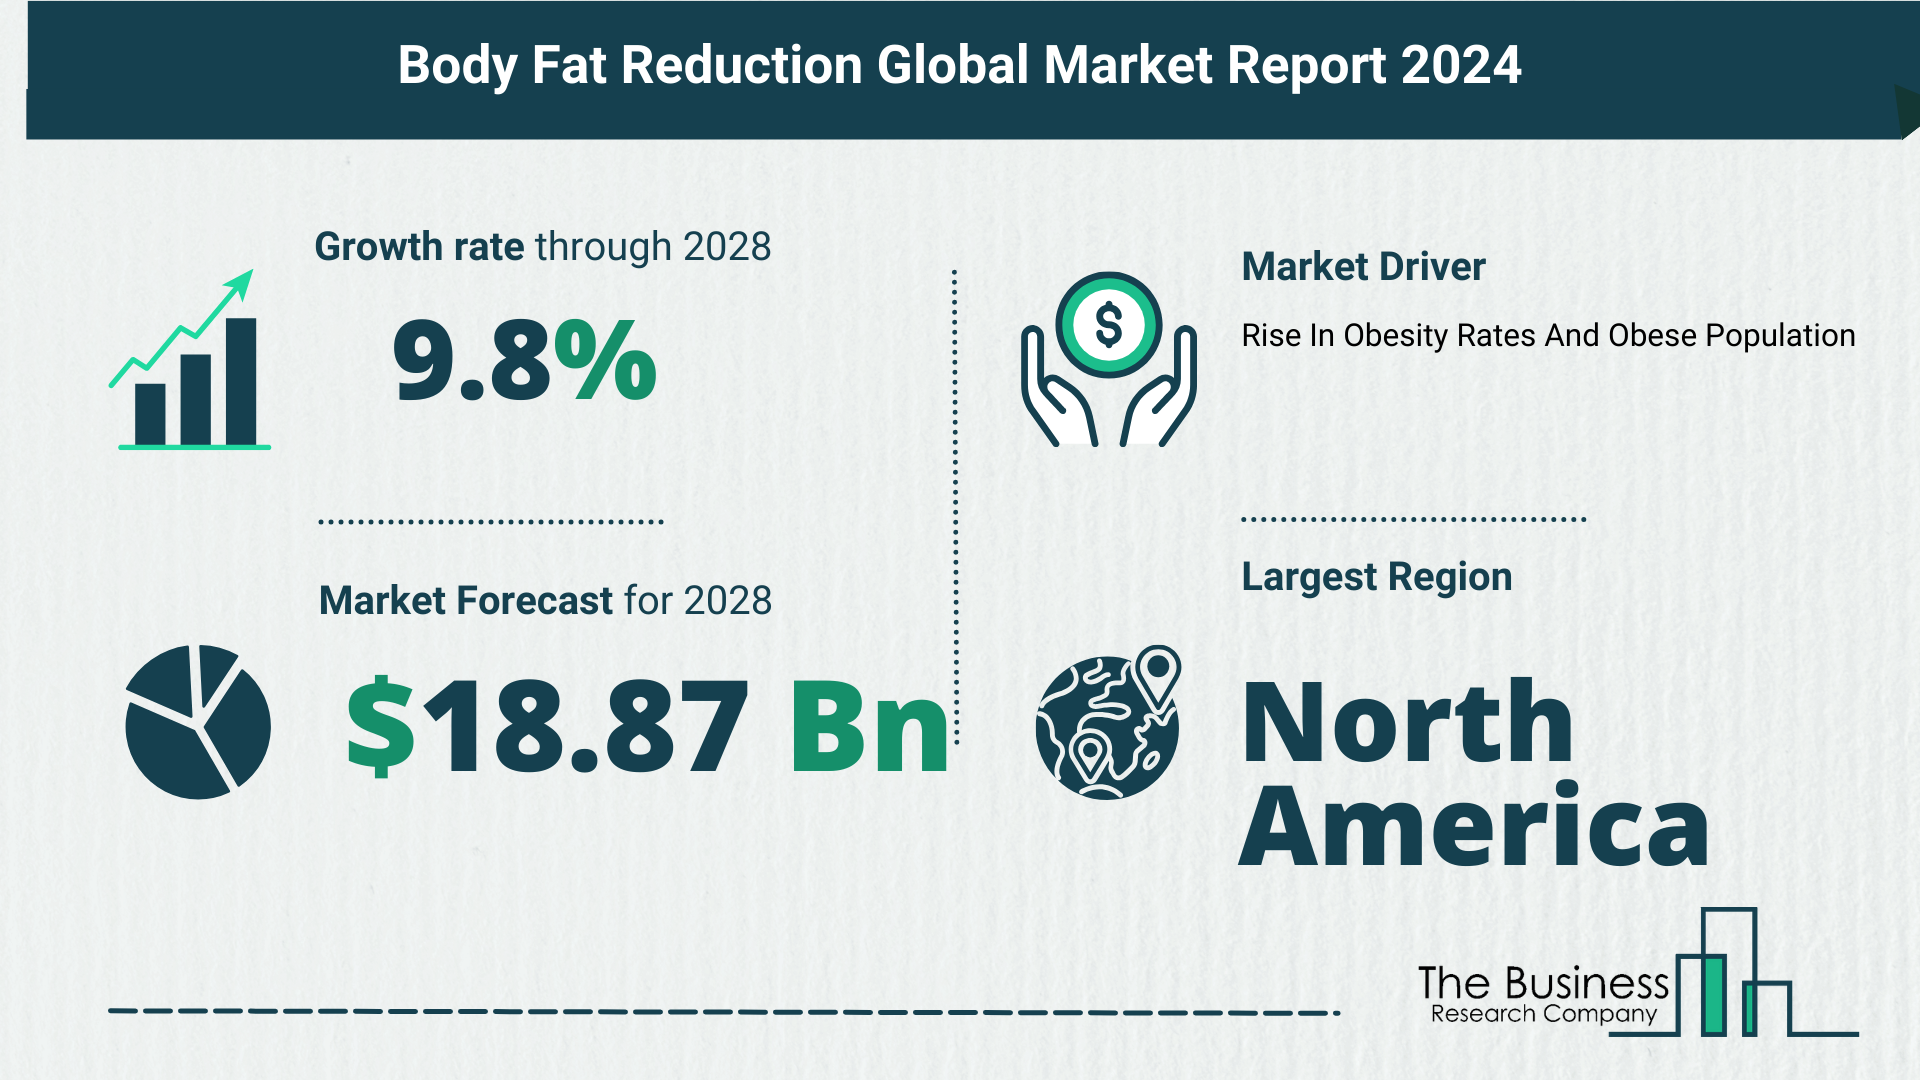 Key Trends And Drivers In The Body Fat Reduction Market 2024